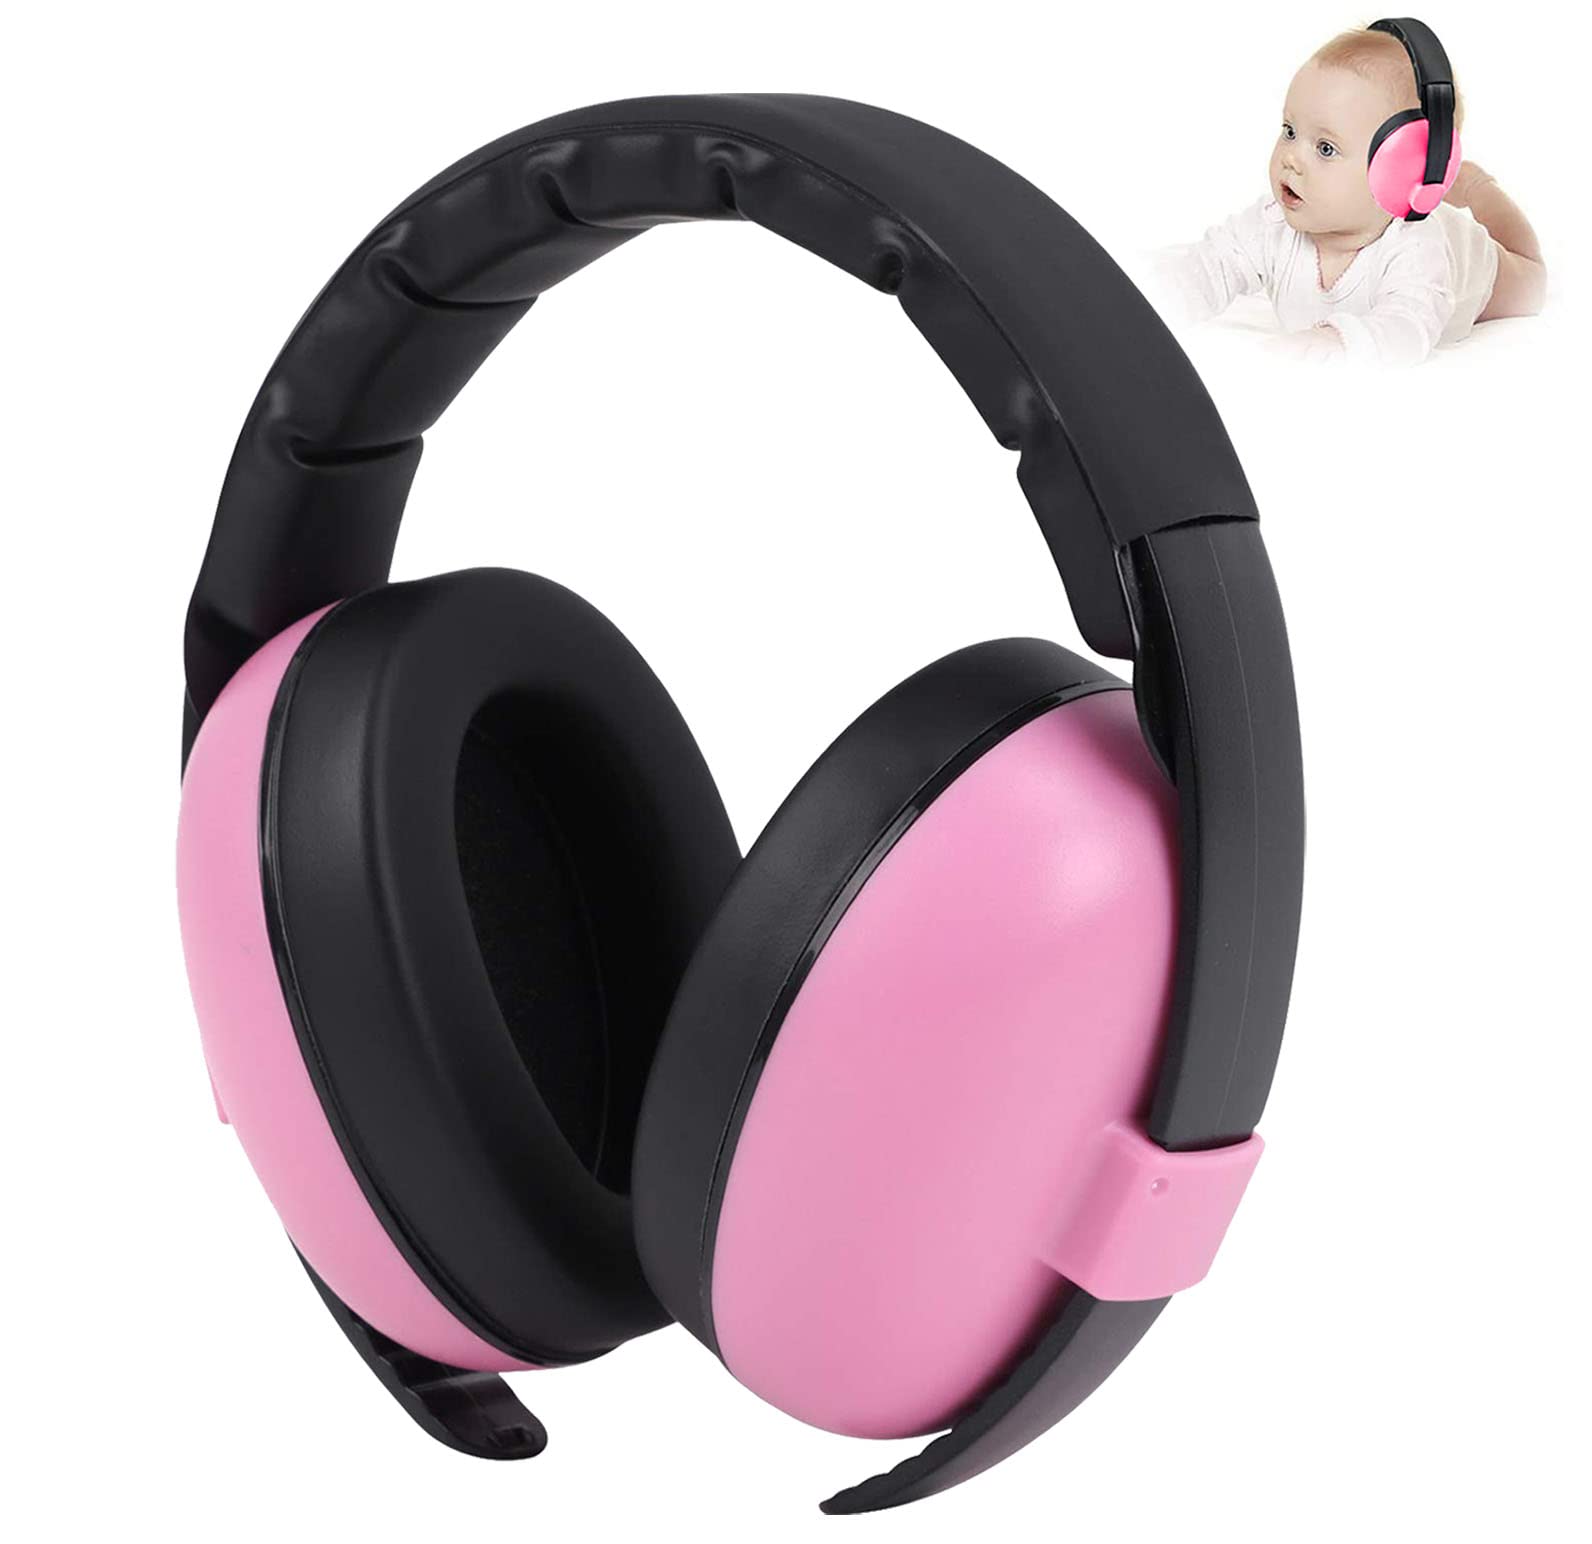 Baby Ear Defenders Noise Cancelling Headphones Ear Protection Adjustable Earmuff For Age 0 To 3 Years At Firework, Concert, Cinema